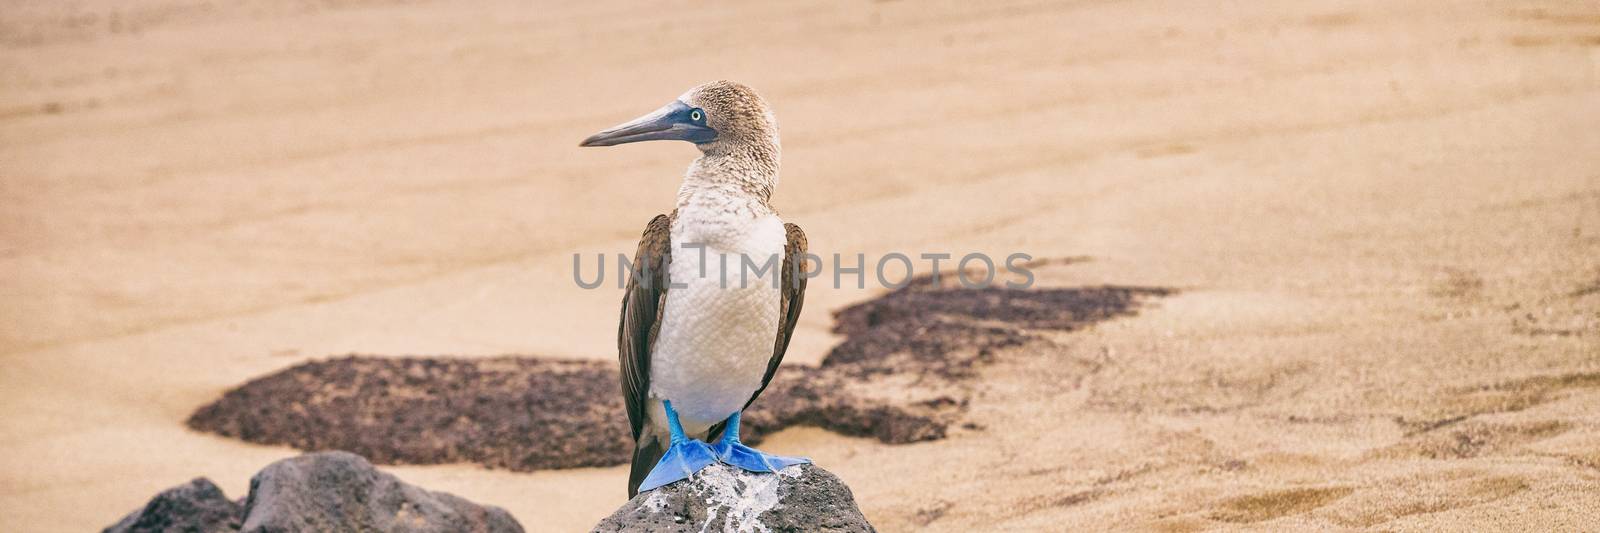 Blue-footed Booby - Iconic famous galapagos wildlife by Maridav